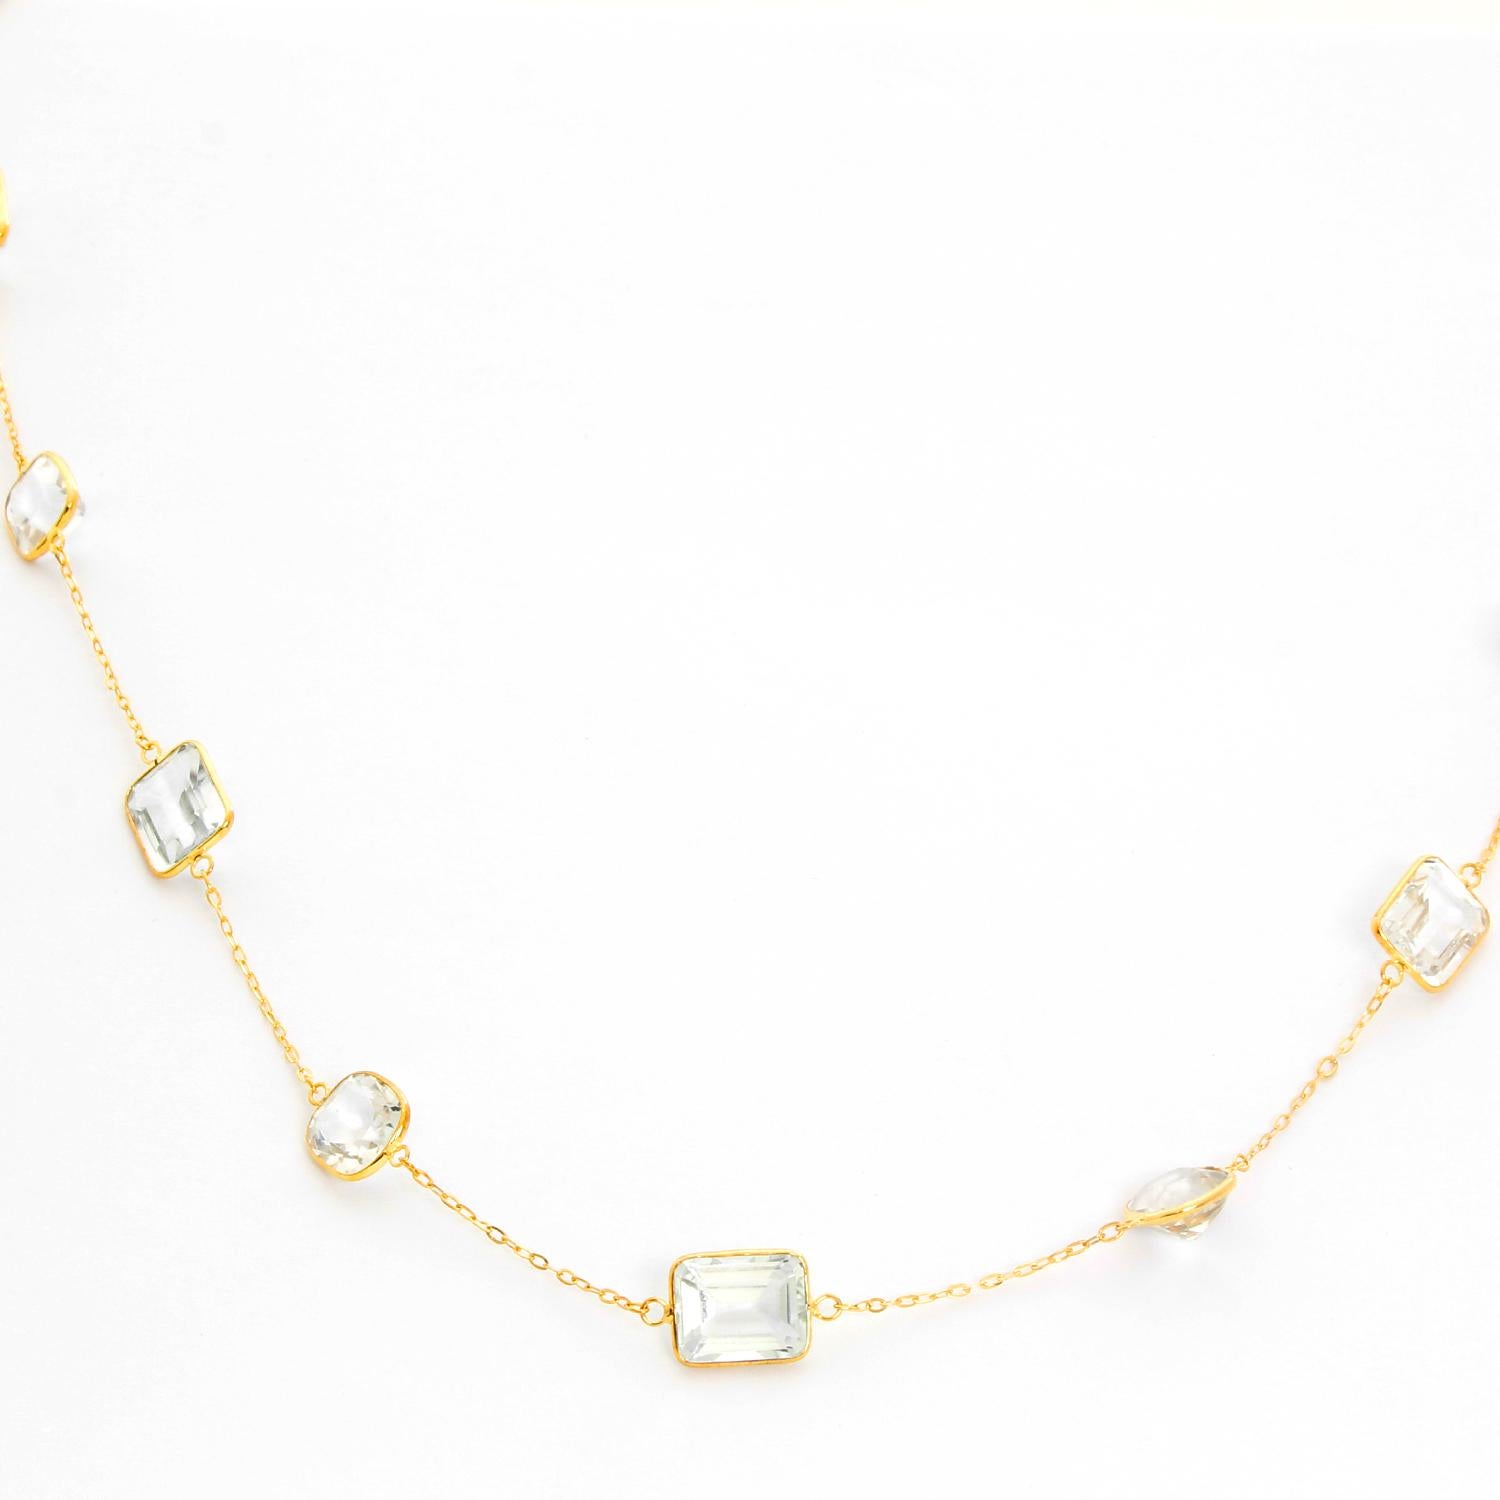 18K Yellow Gold White Topaz Diamond by the Yard Long Necklace - 18K Yellow Gold with 27 beautiful White Topaz  38